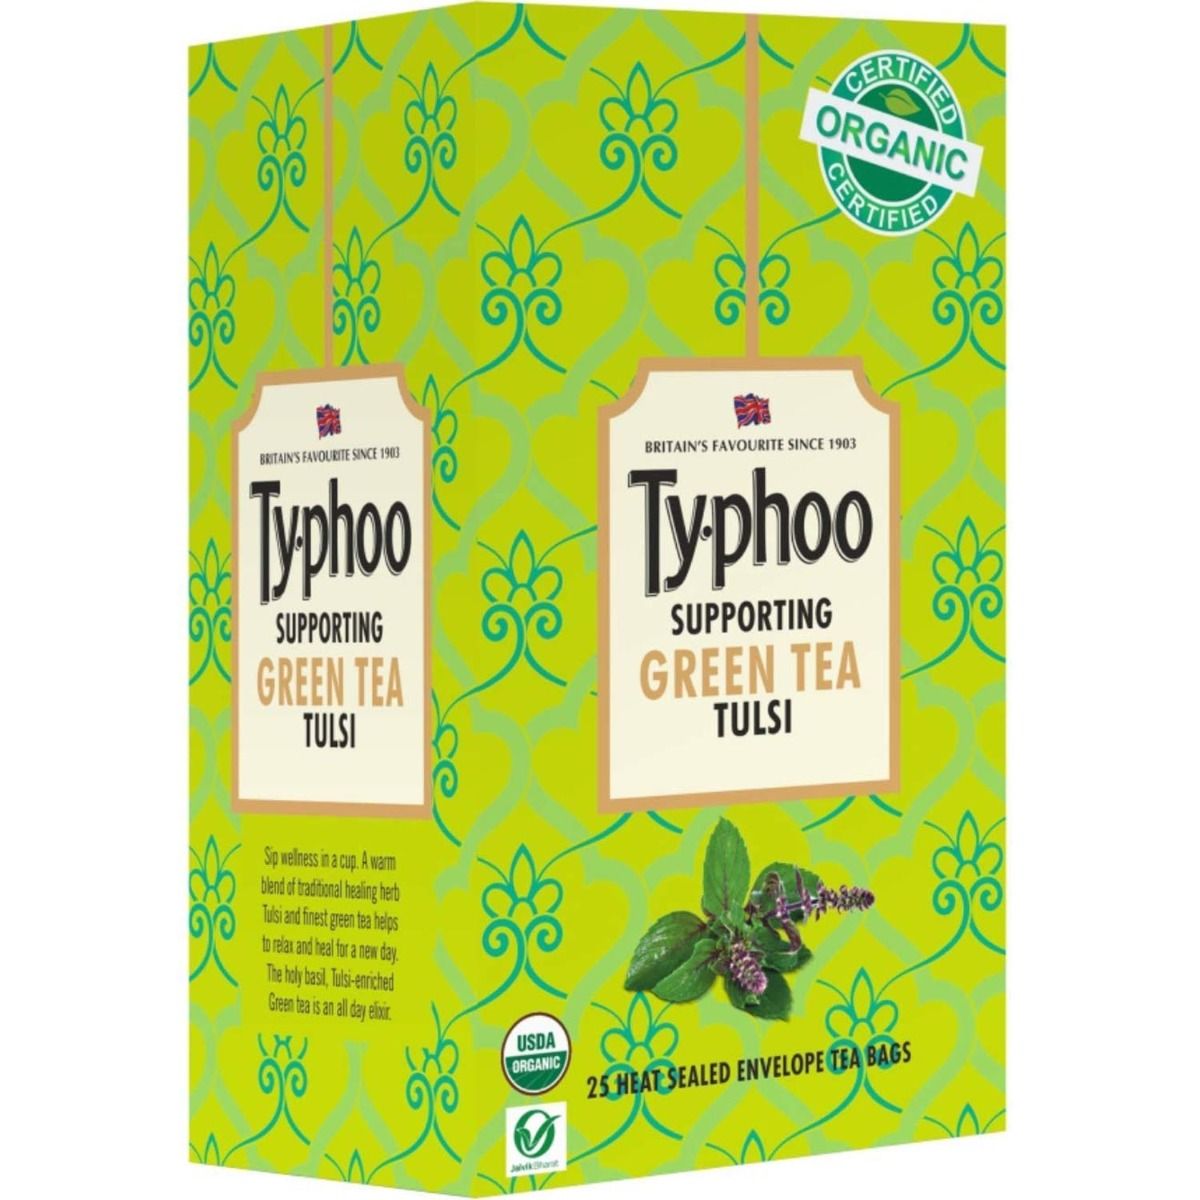 Ty.phoo Supporting Green Tea Tulsi Bags, 25 Count, Pack of 1 